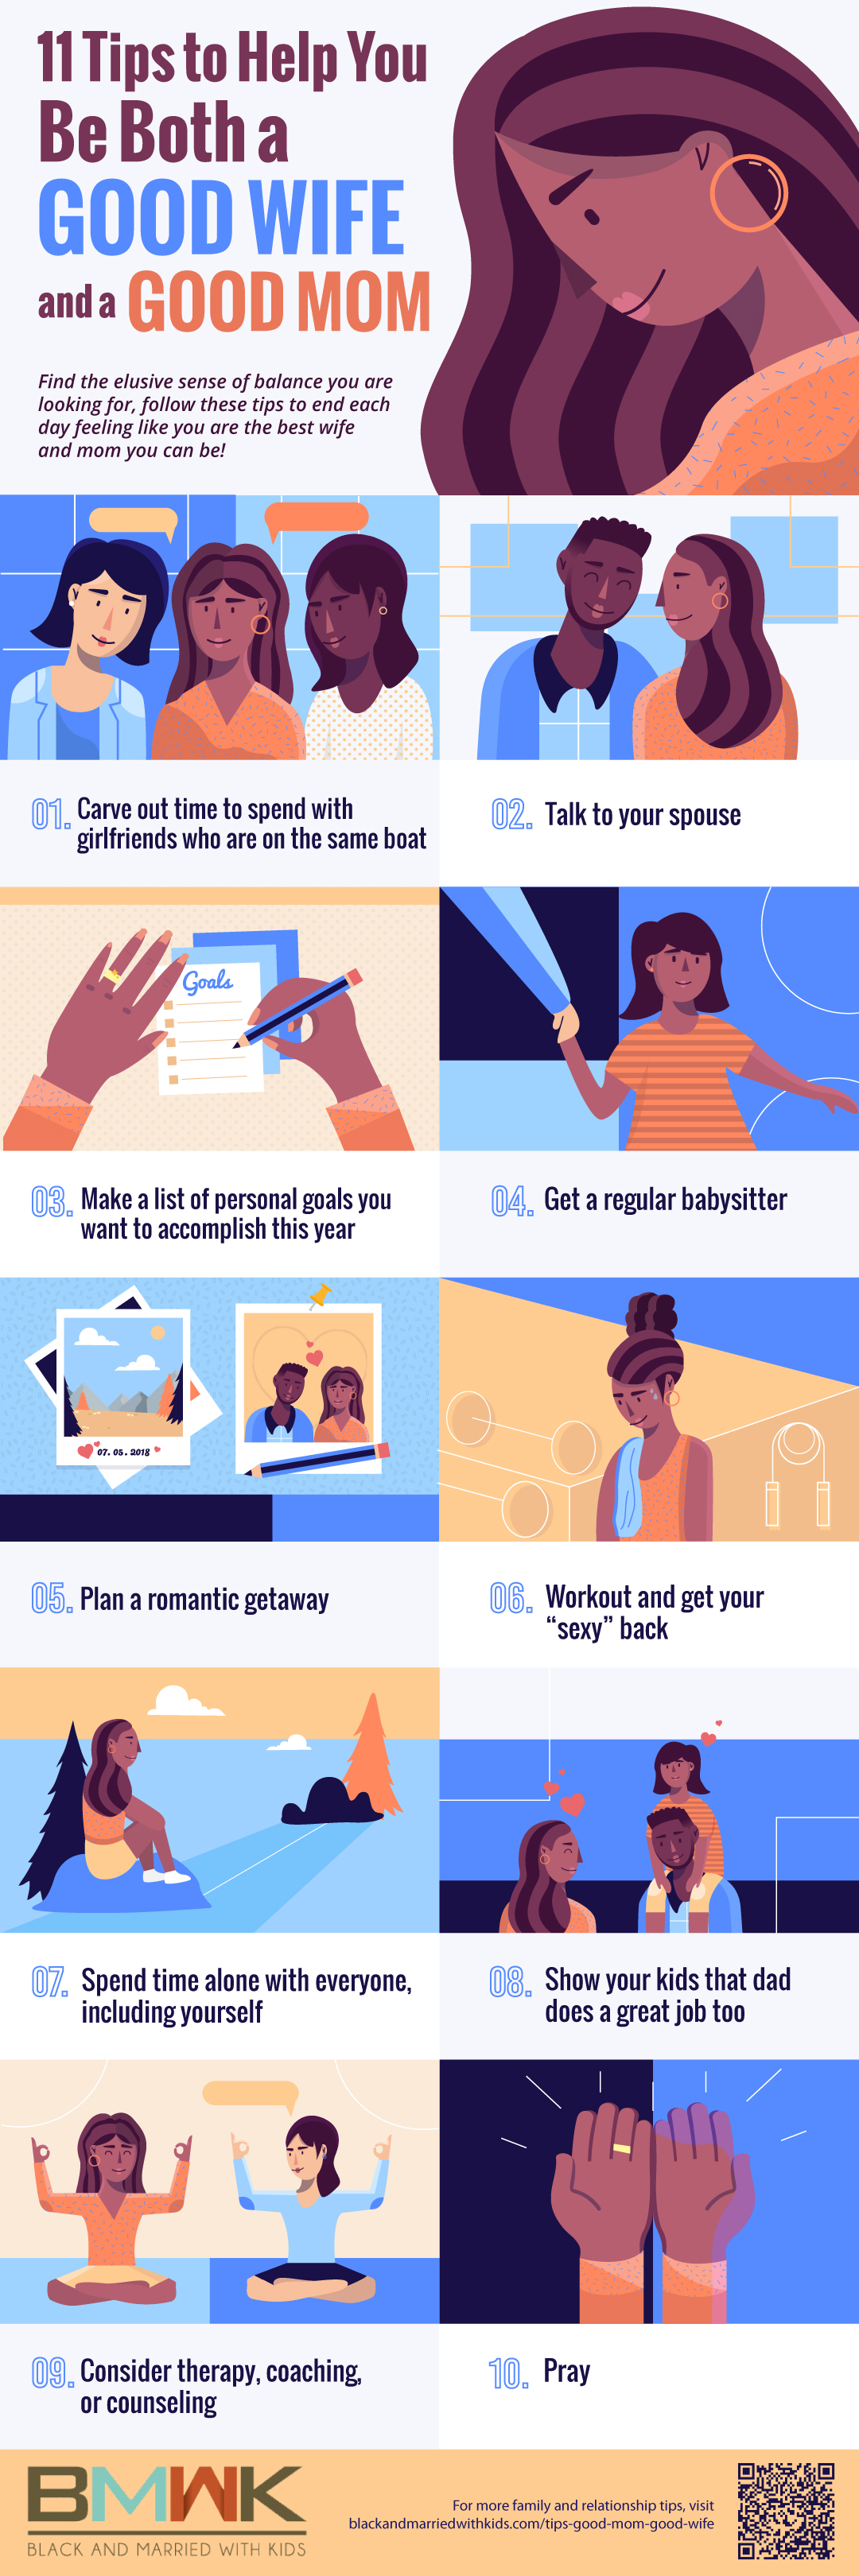 infographic | Tips to Help You Be Both a Good Mom and a Good Wife | How to be a Good Mom